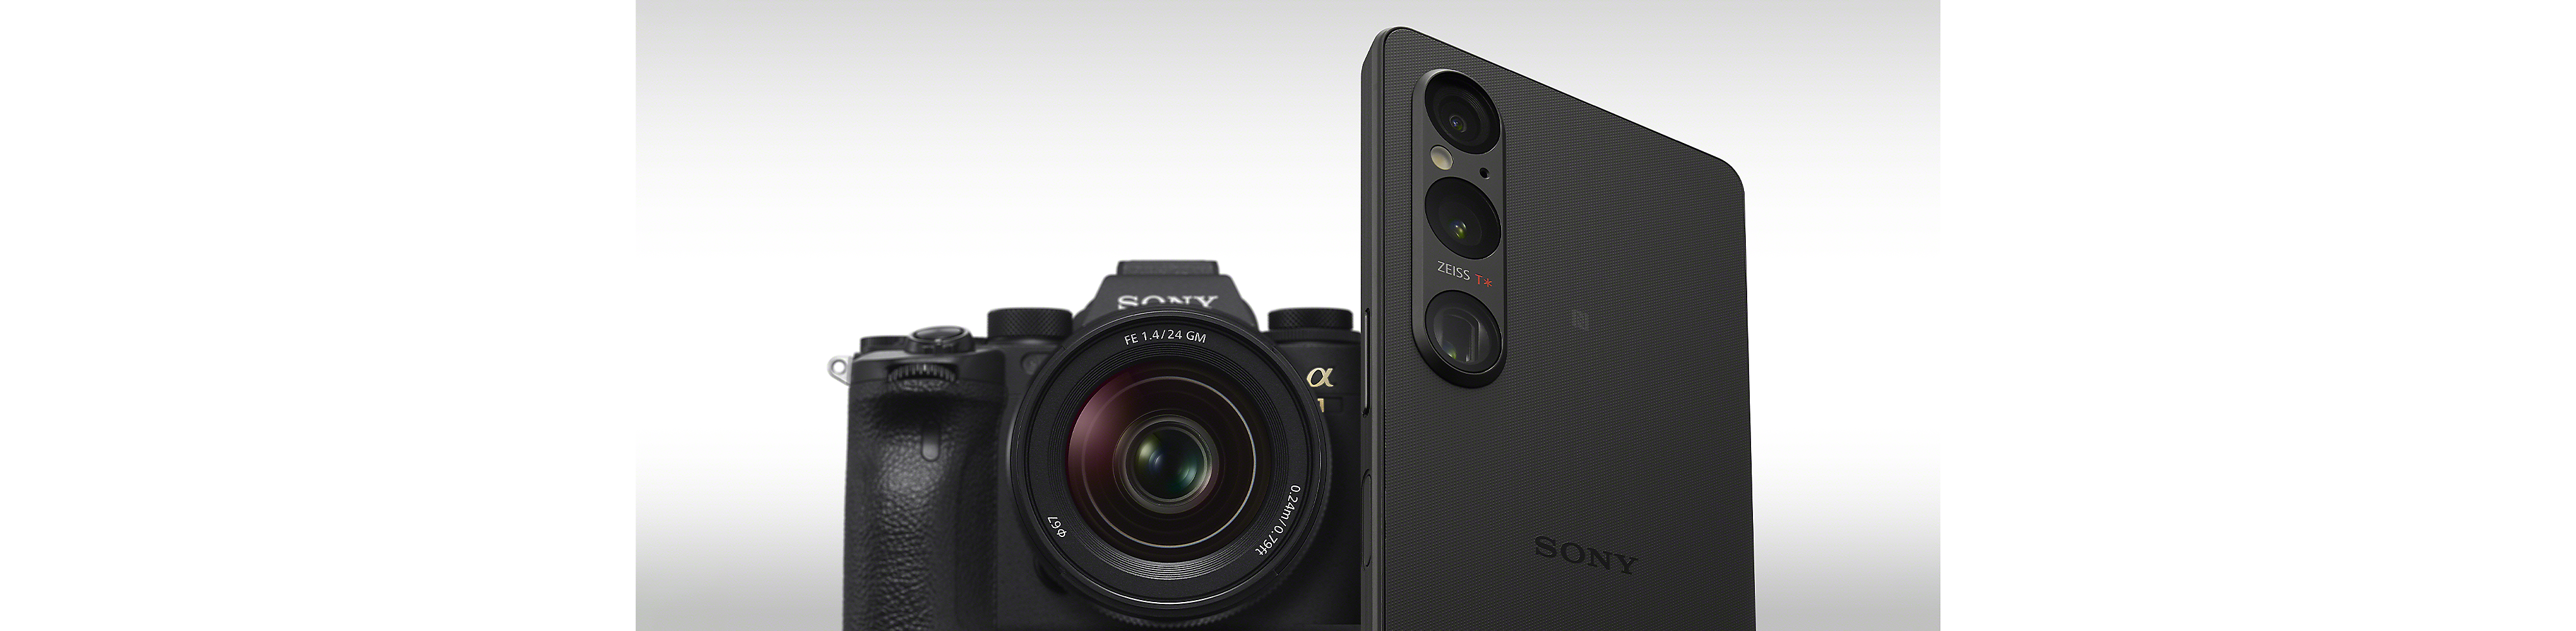 An Xperia 1 V in the foreground, a Sony Alpha camera in the background